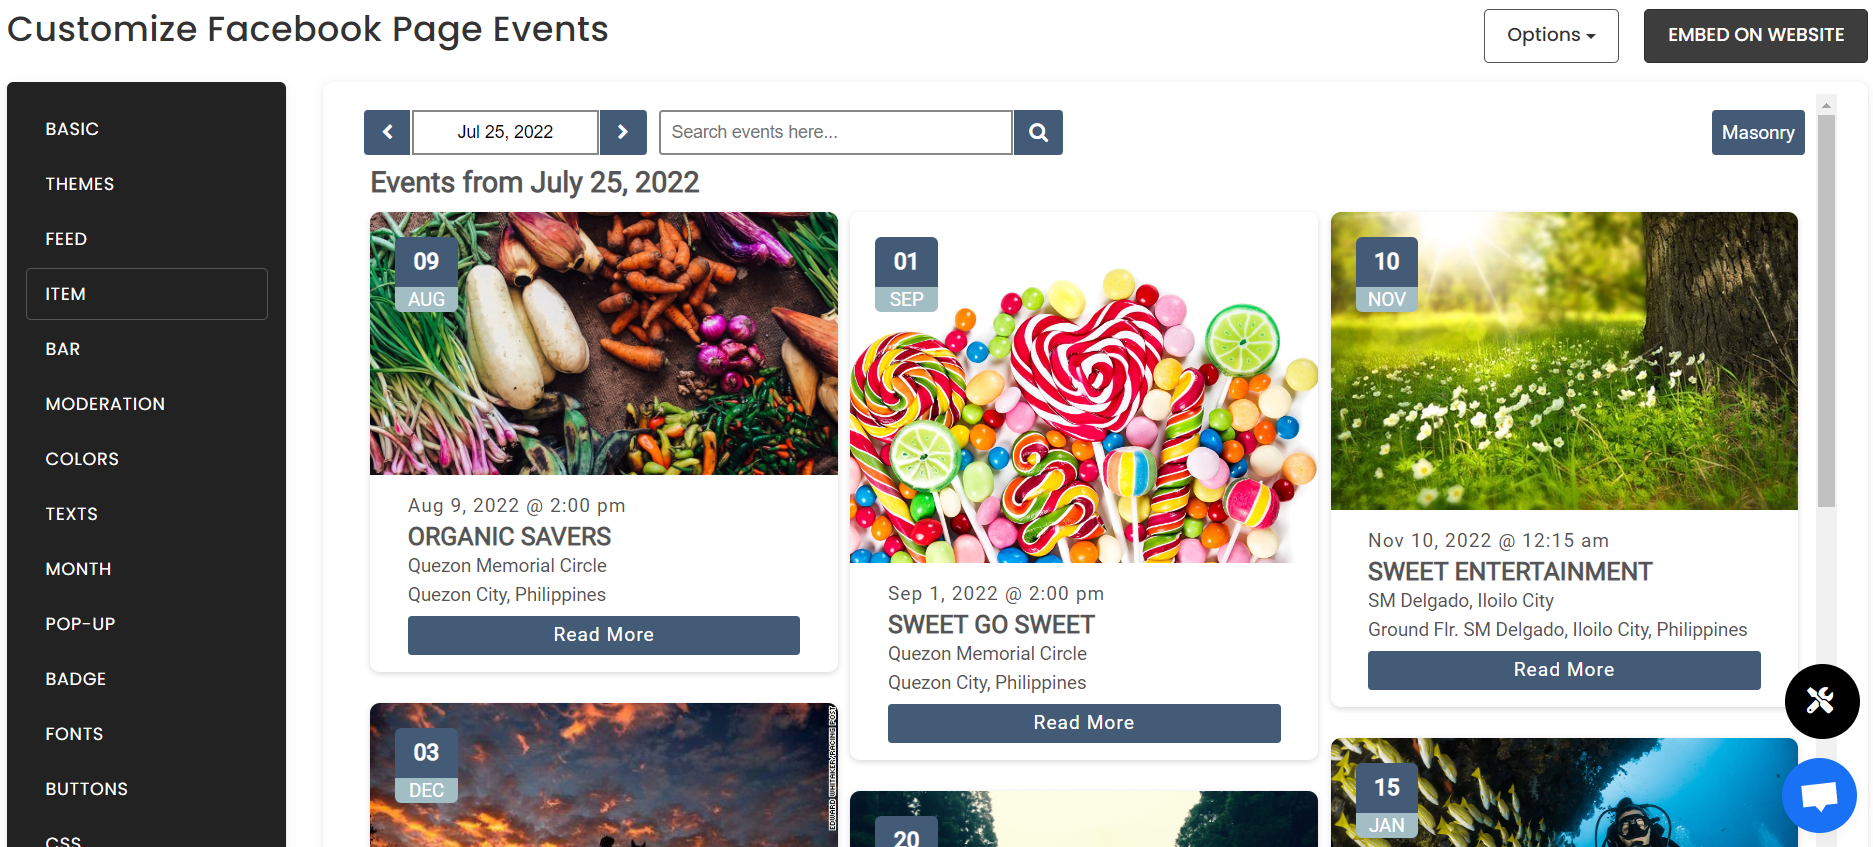 Customize your feed - Free Facebook Page Events Widget For Weebly Website